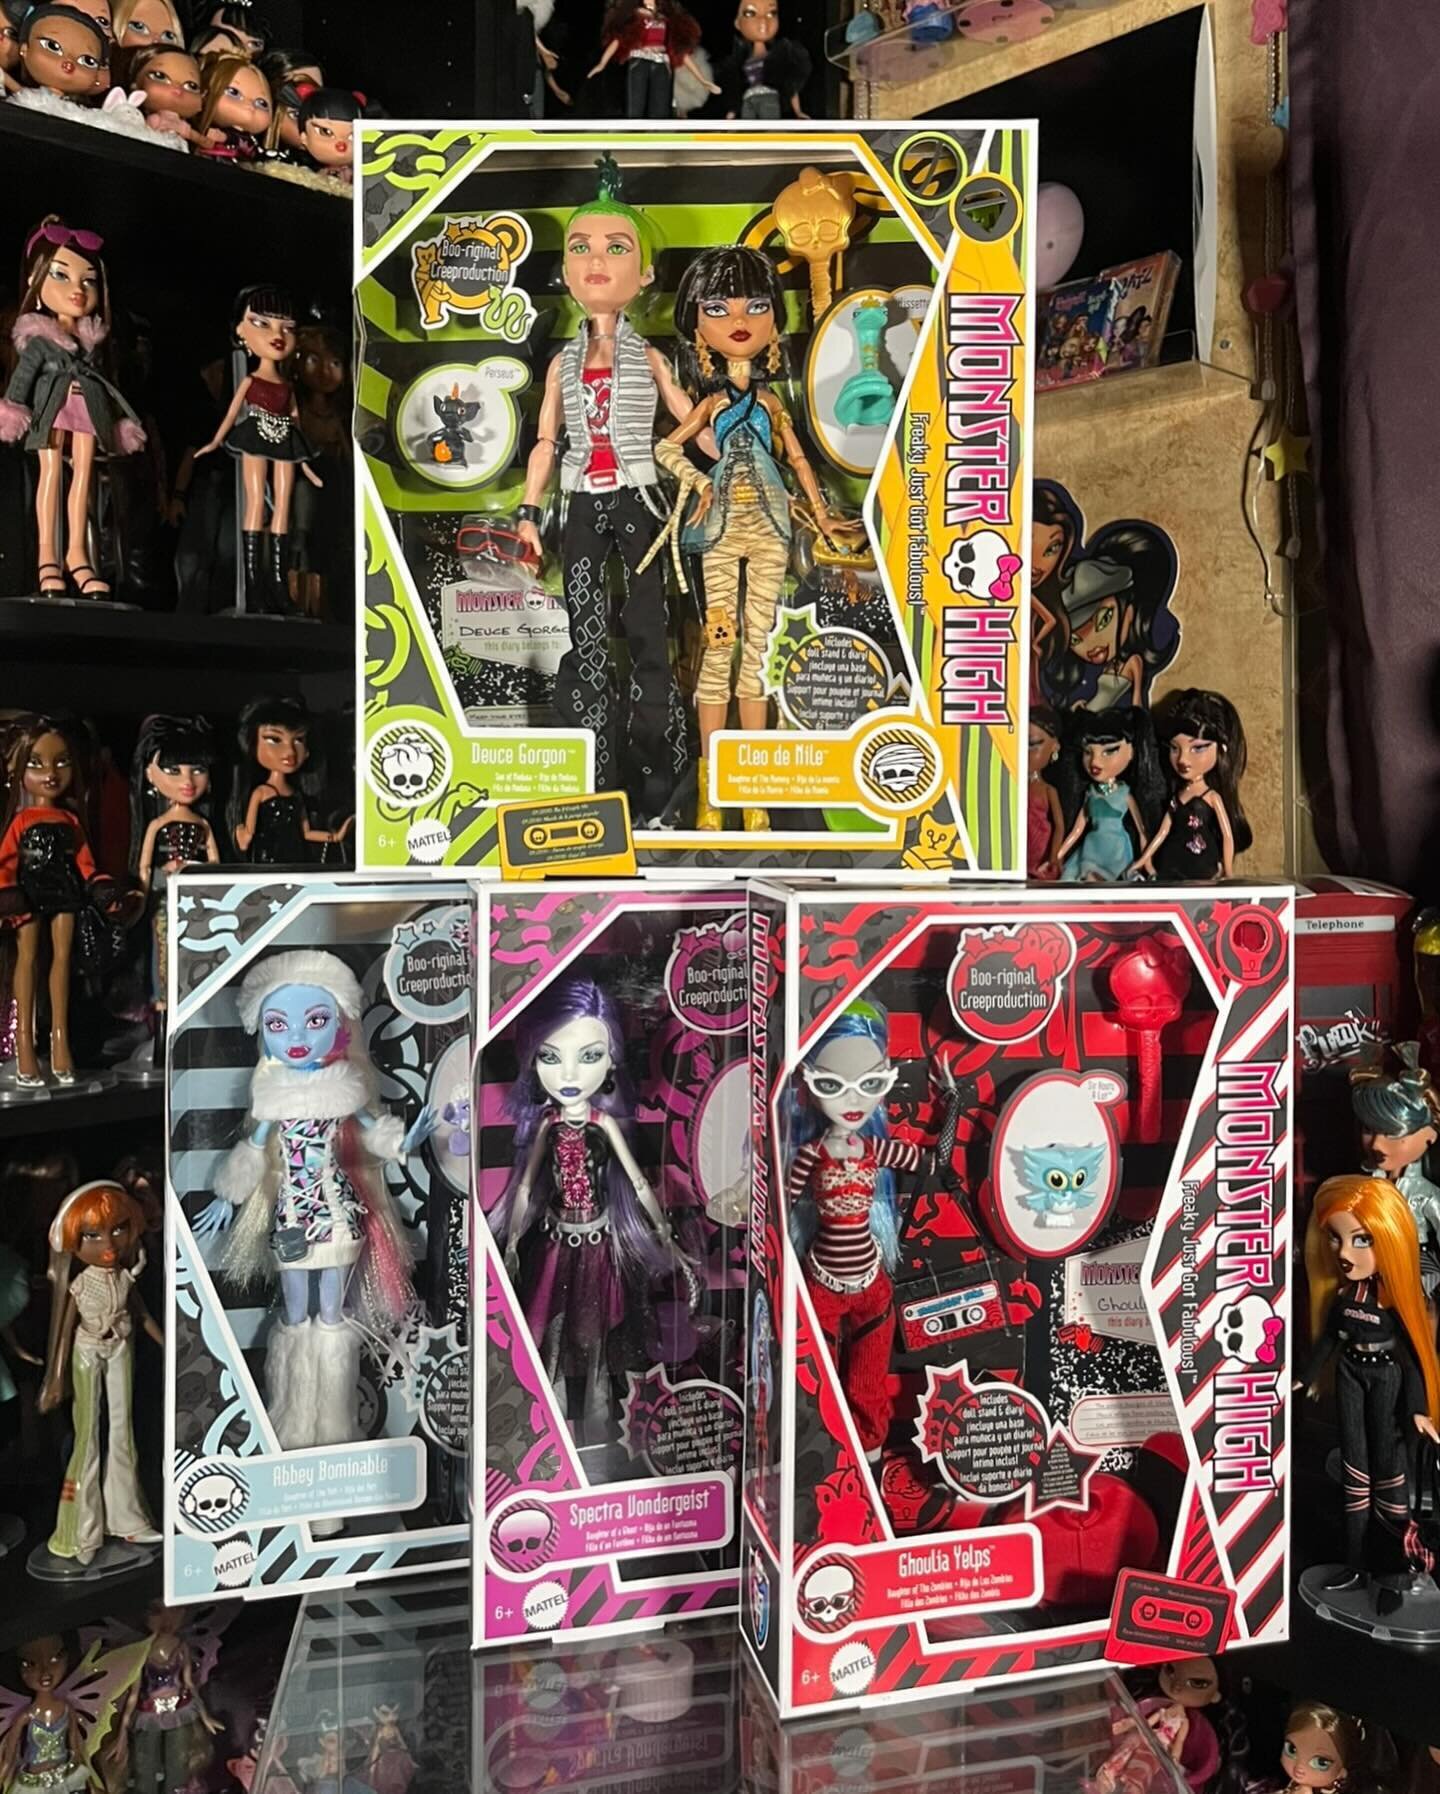 Hey Angelz! My 10k subscriber special (and first-ever) livestream is starting now!!!

Join me in unboxing a ton of dolls, including the Monster High Creeproductions Wave 2, L.O.L. Surprise, a mystery Bratz doll, my first Silkstone Barbie, and more! P